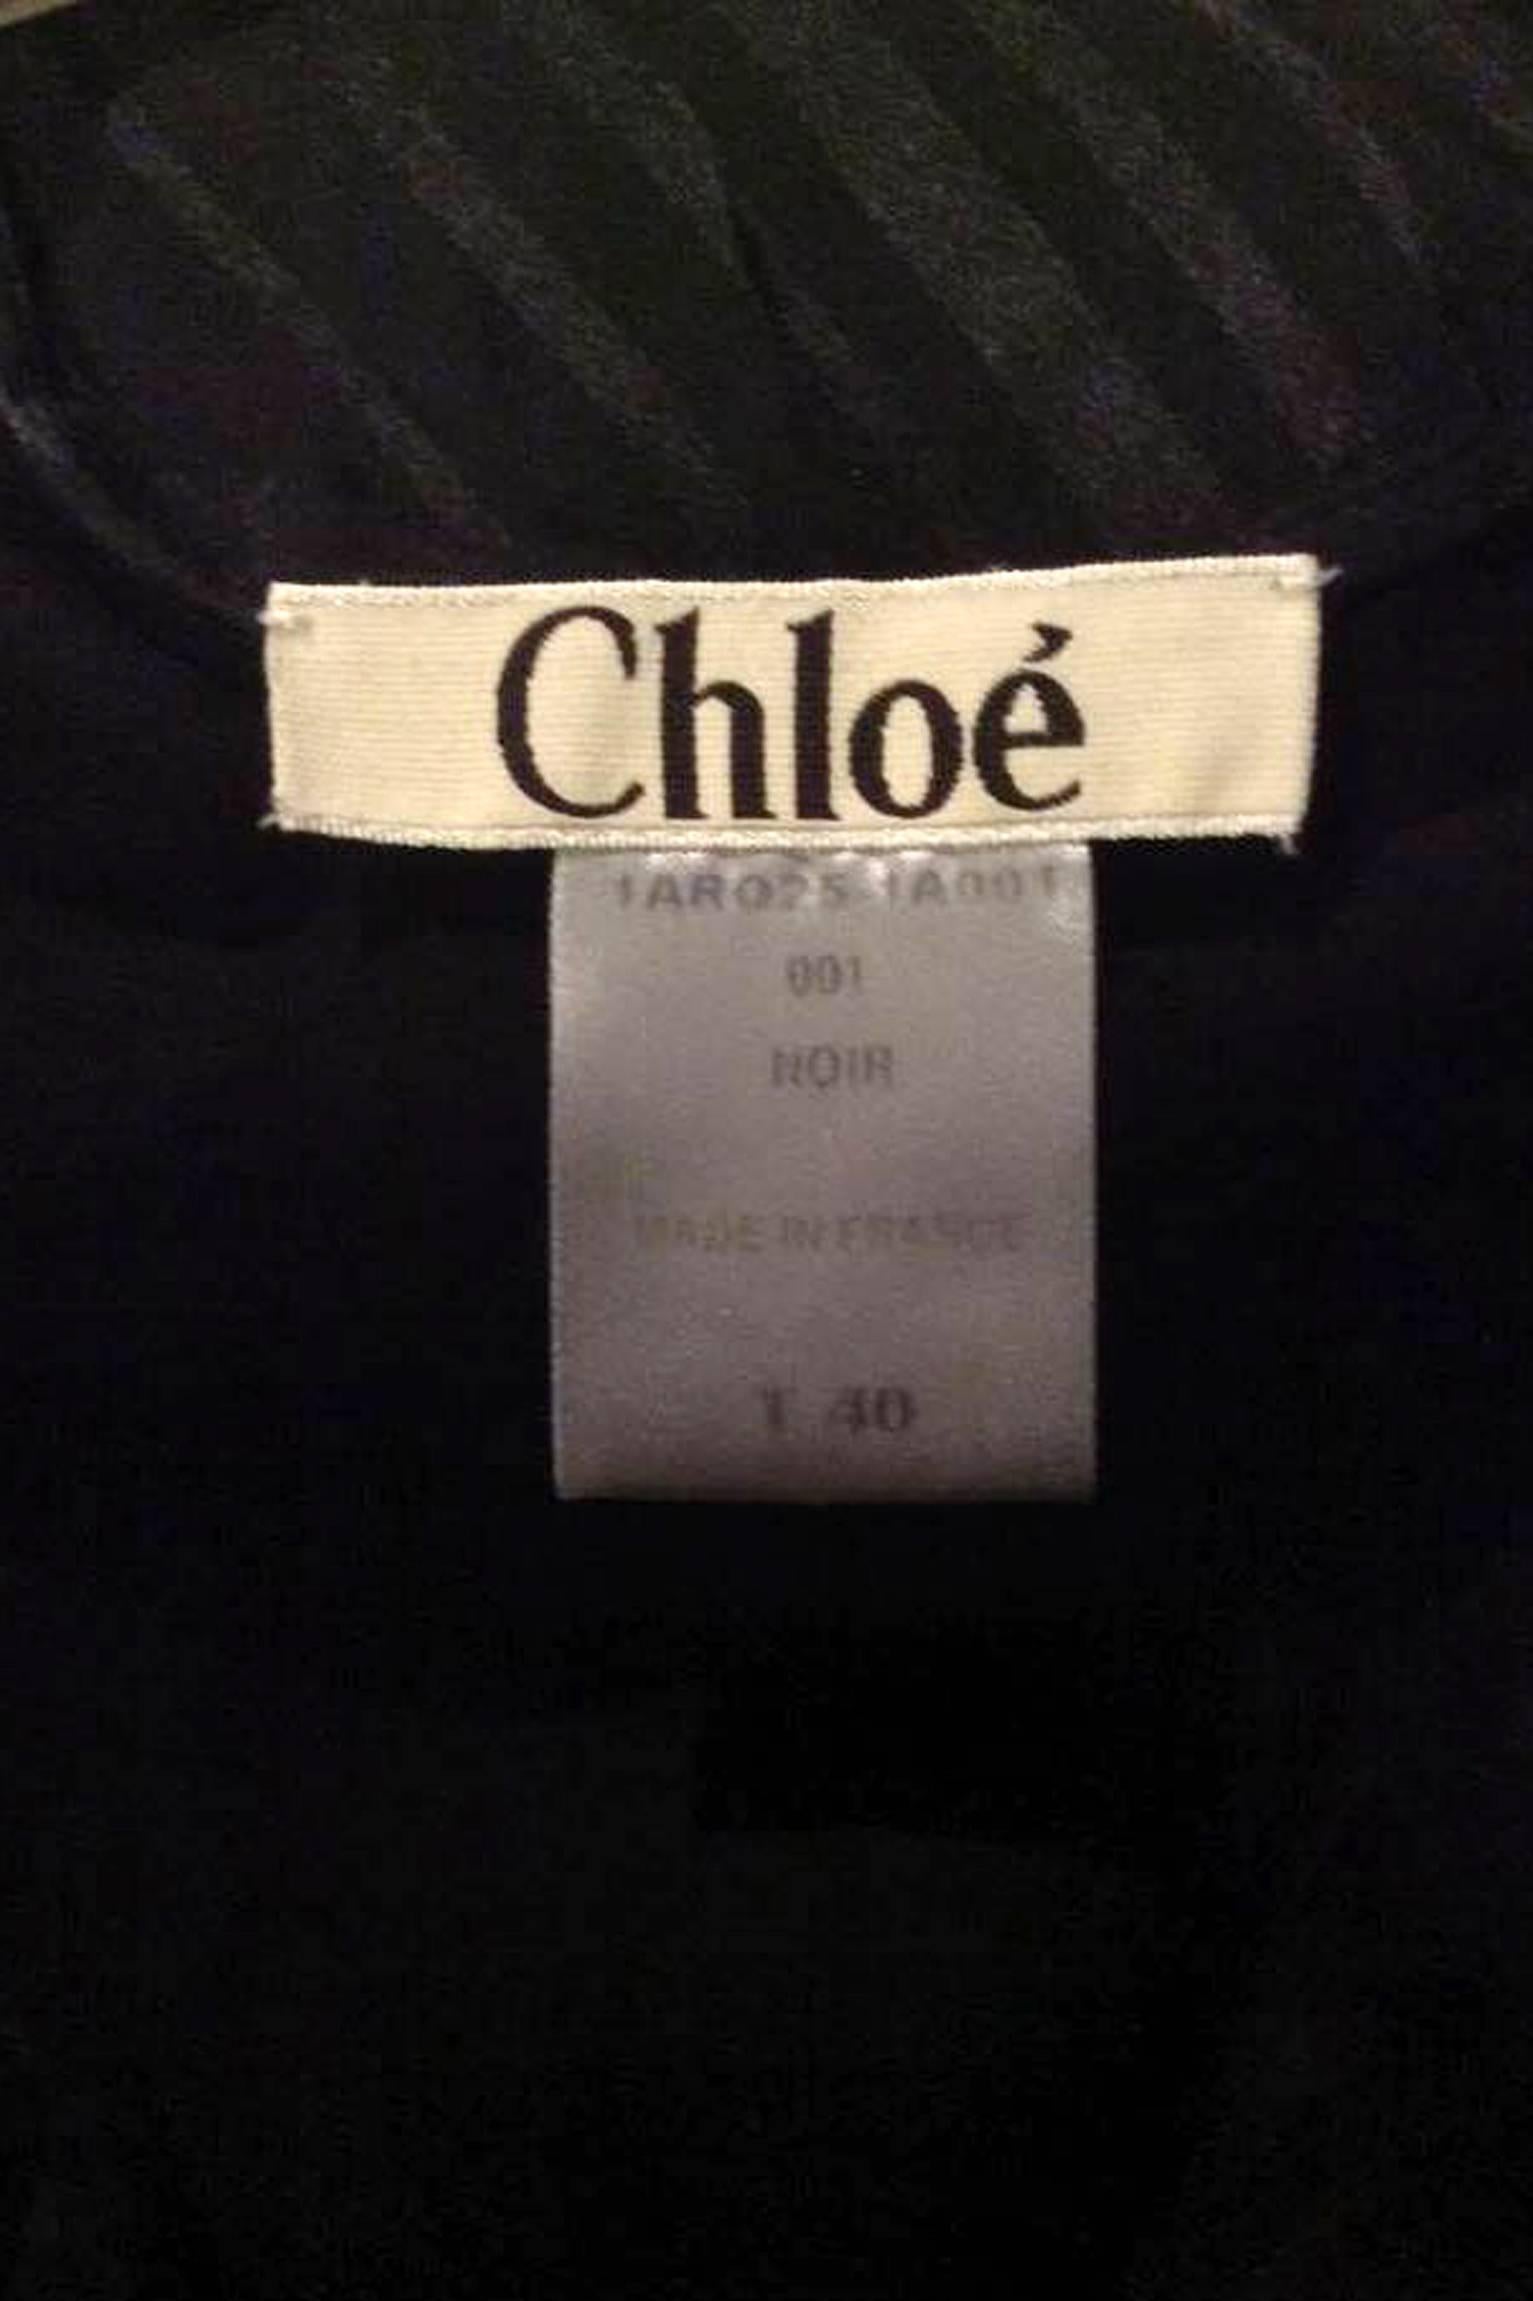 An elegant 80s Chloé black silk chiffon diagonal cut cocktail dress with an a-line wrap front and raw edged sleeves. The dress has a detachable matching waistbelt with a silk velvet trim. The dress has a side zipper and push button closure and is